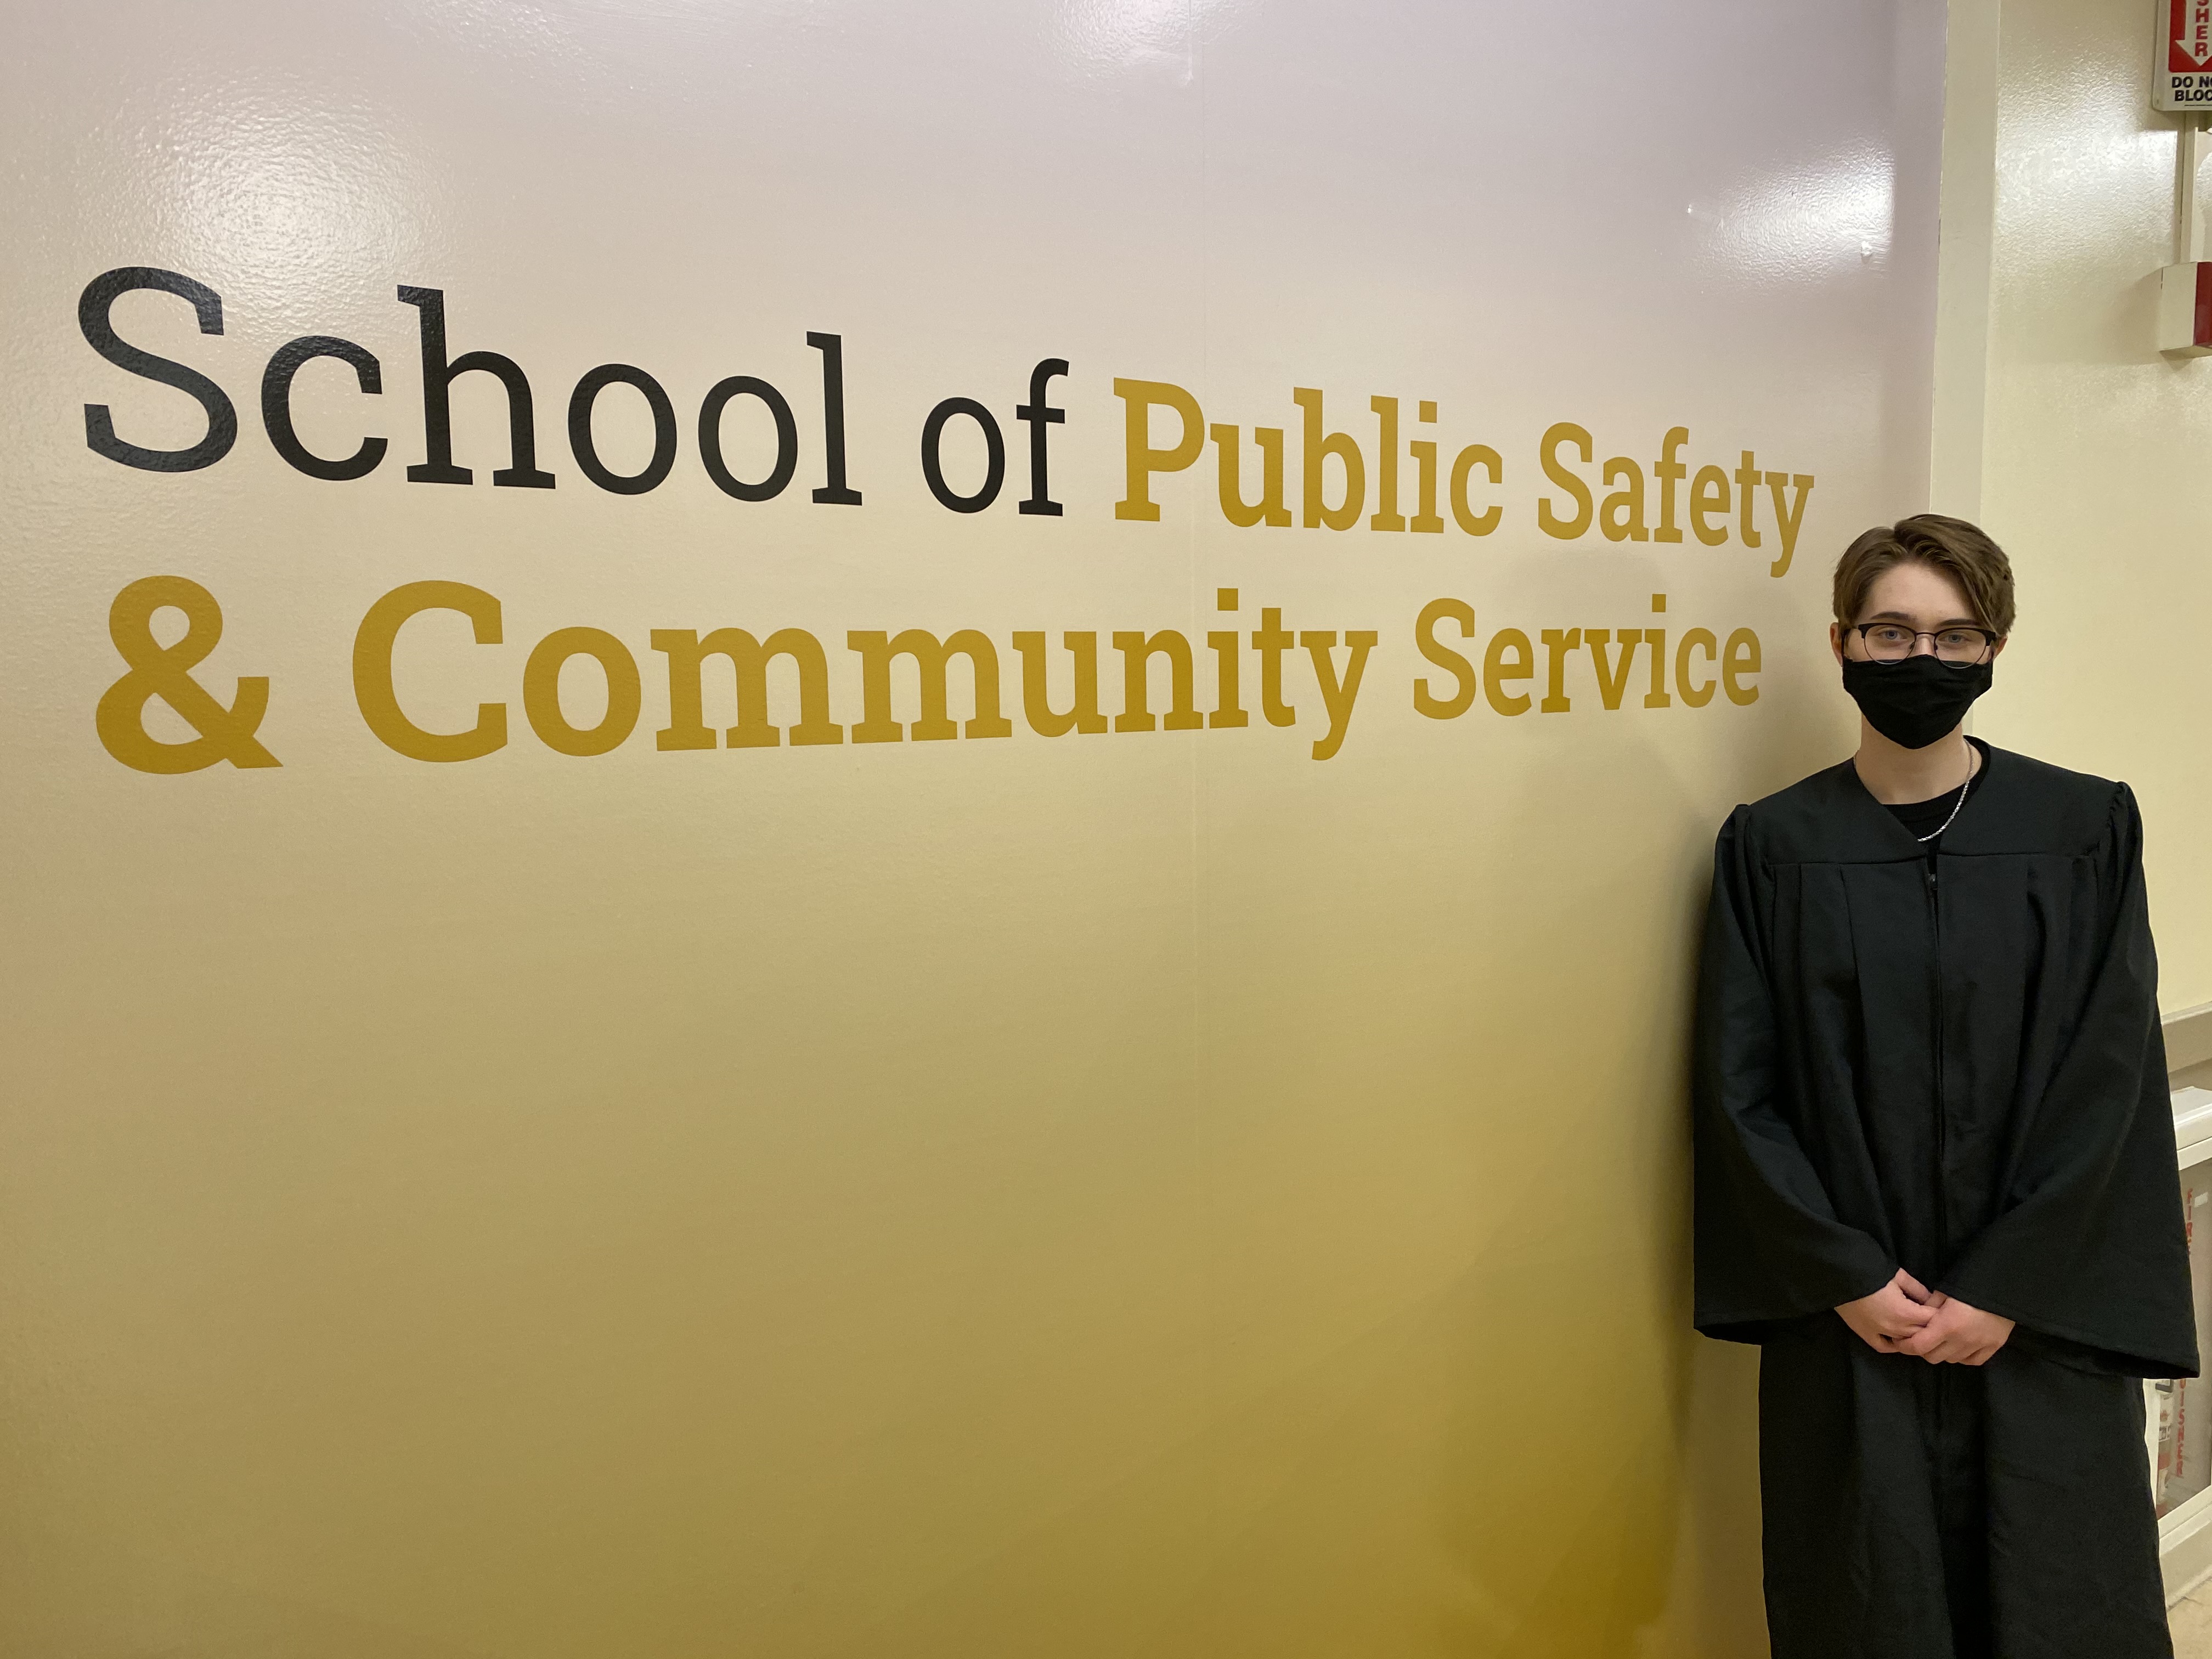 Woman standing in front of a sign that says "School of Public Safety & Community Service"